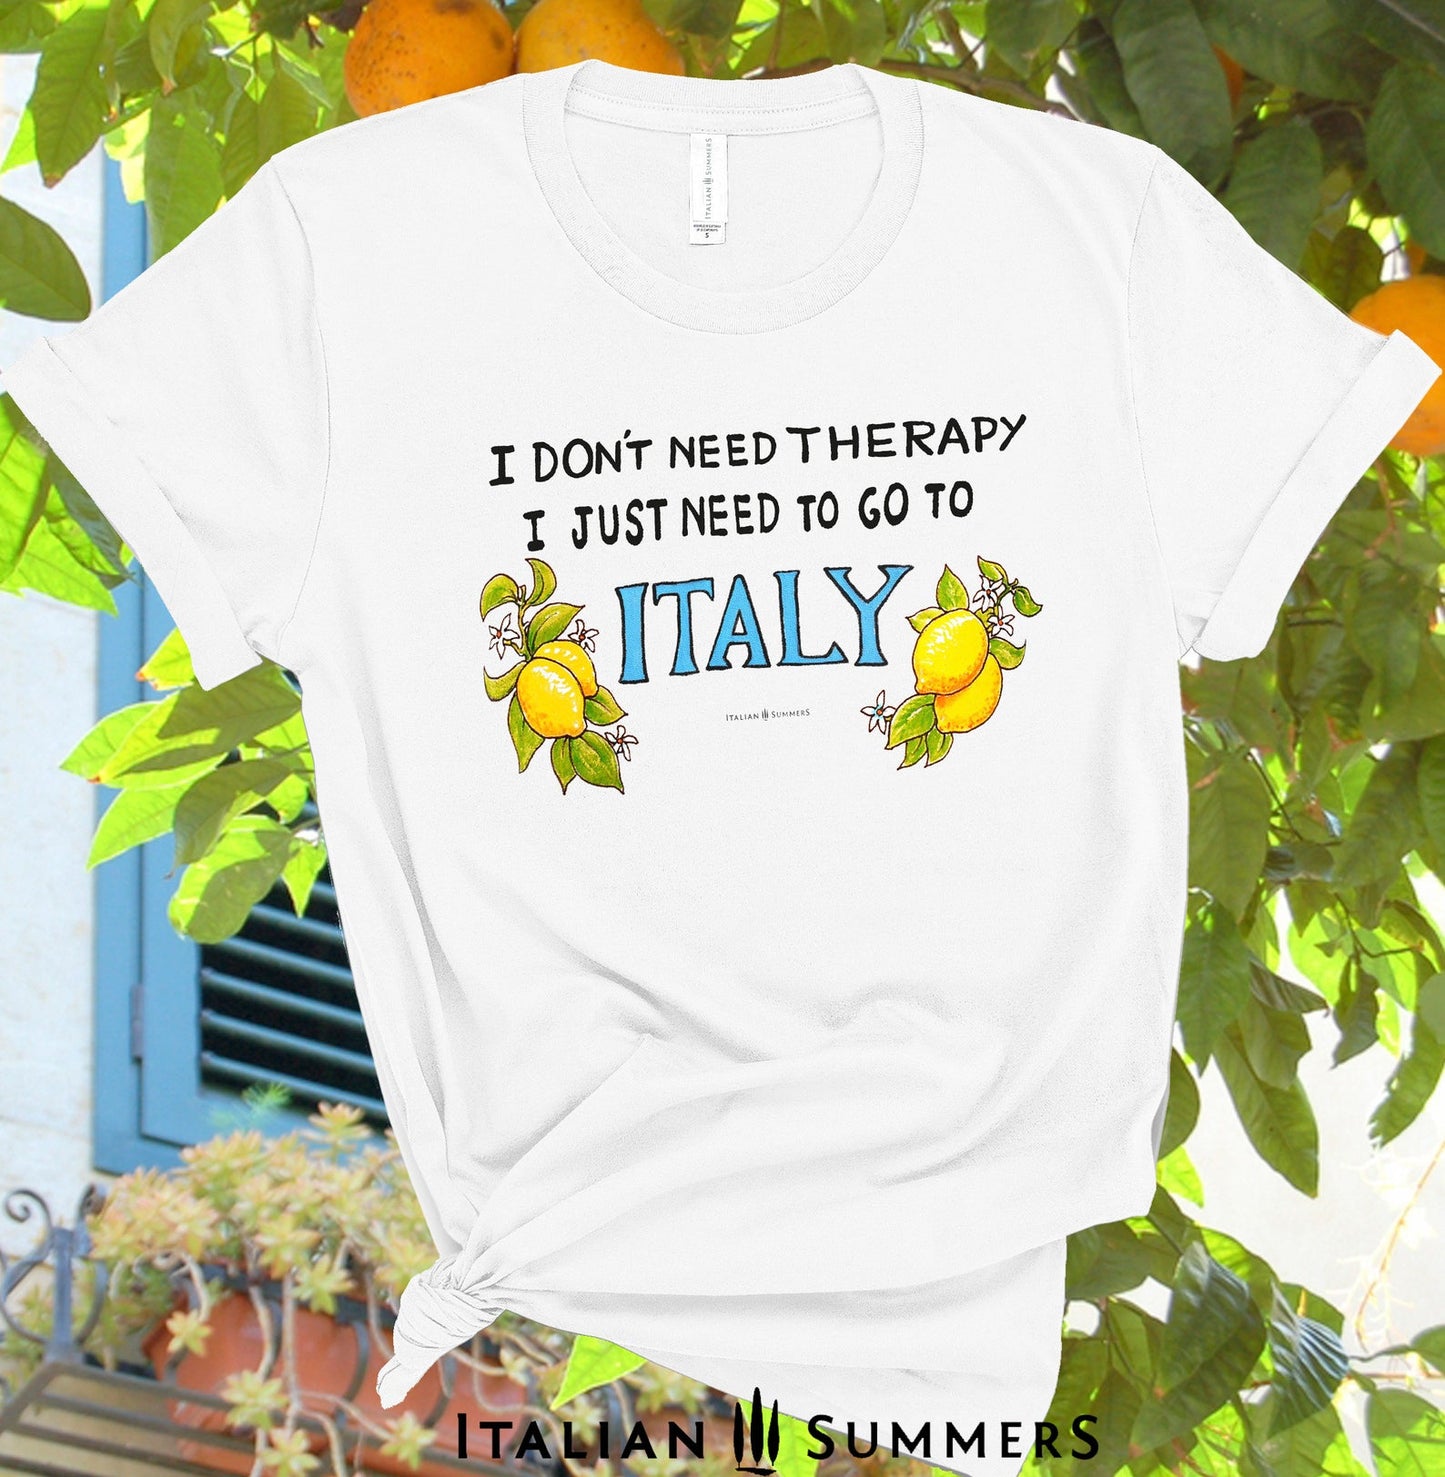 Italy inspired white cotton T shirt with the quote " I don't need therapy I just need to go to Italy" the word " Italy" Is in capital blue letters and flanked by hand-painted bunches of lemons with flowers. A bestseller made by Italian Summers